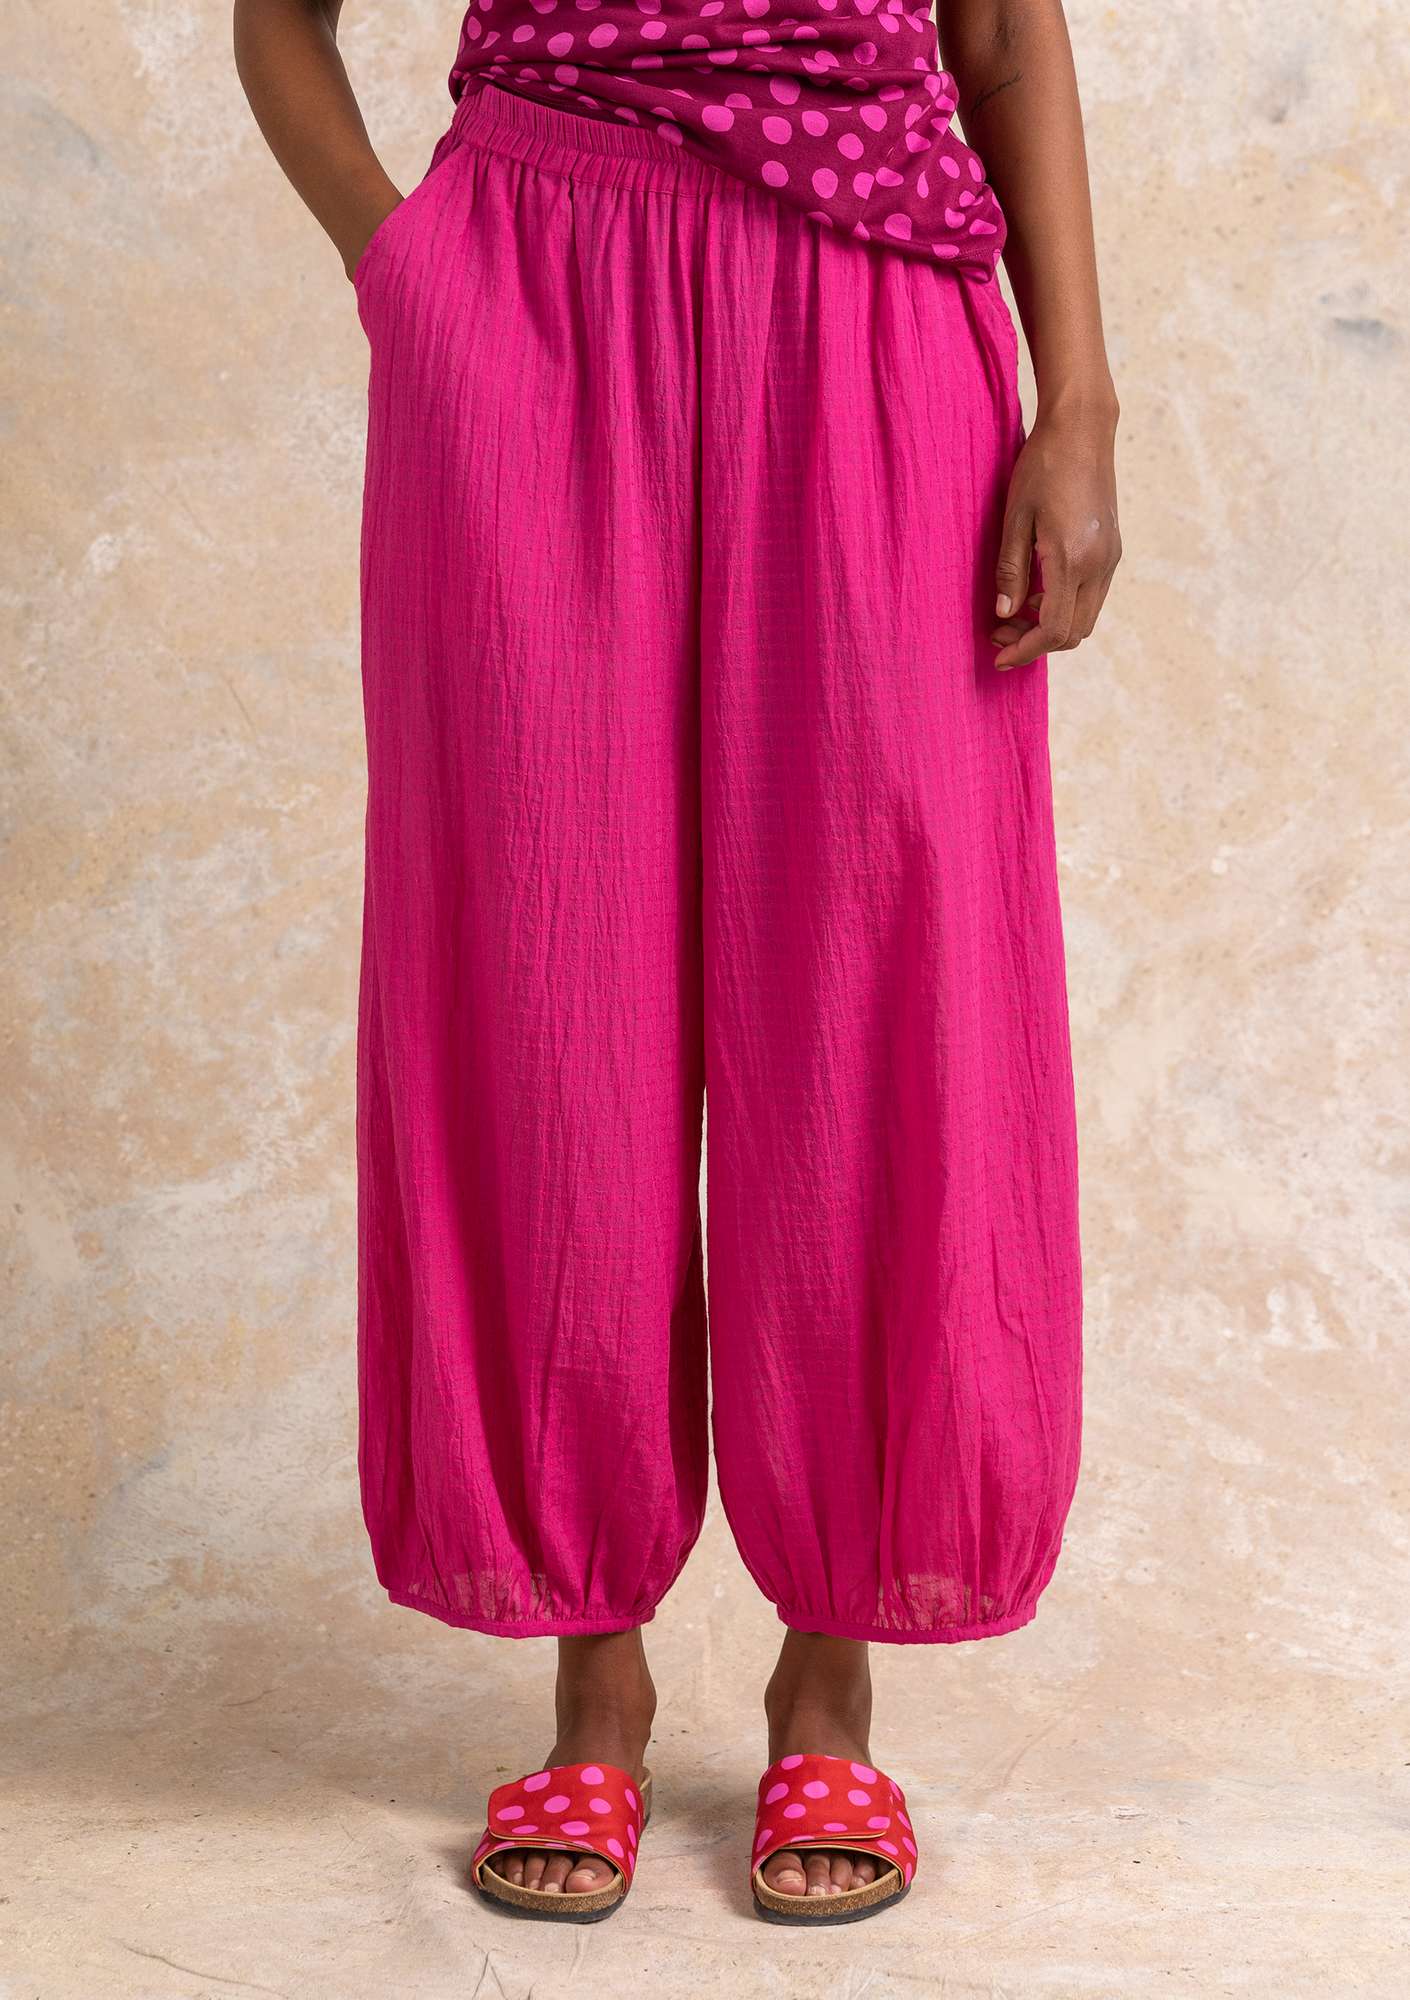 Pants in cotton/modal/rayon woven fabric cerise